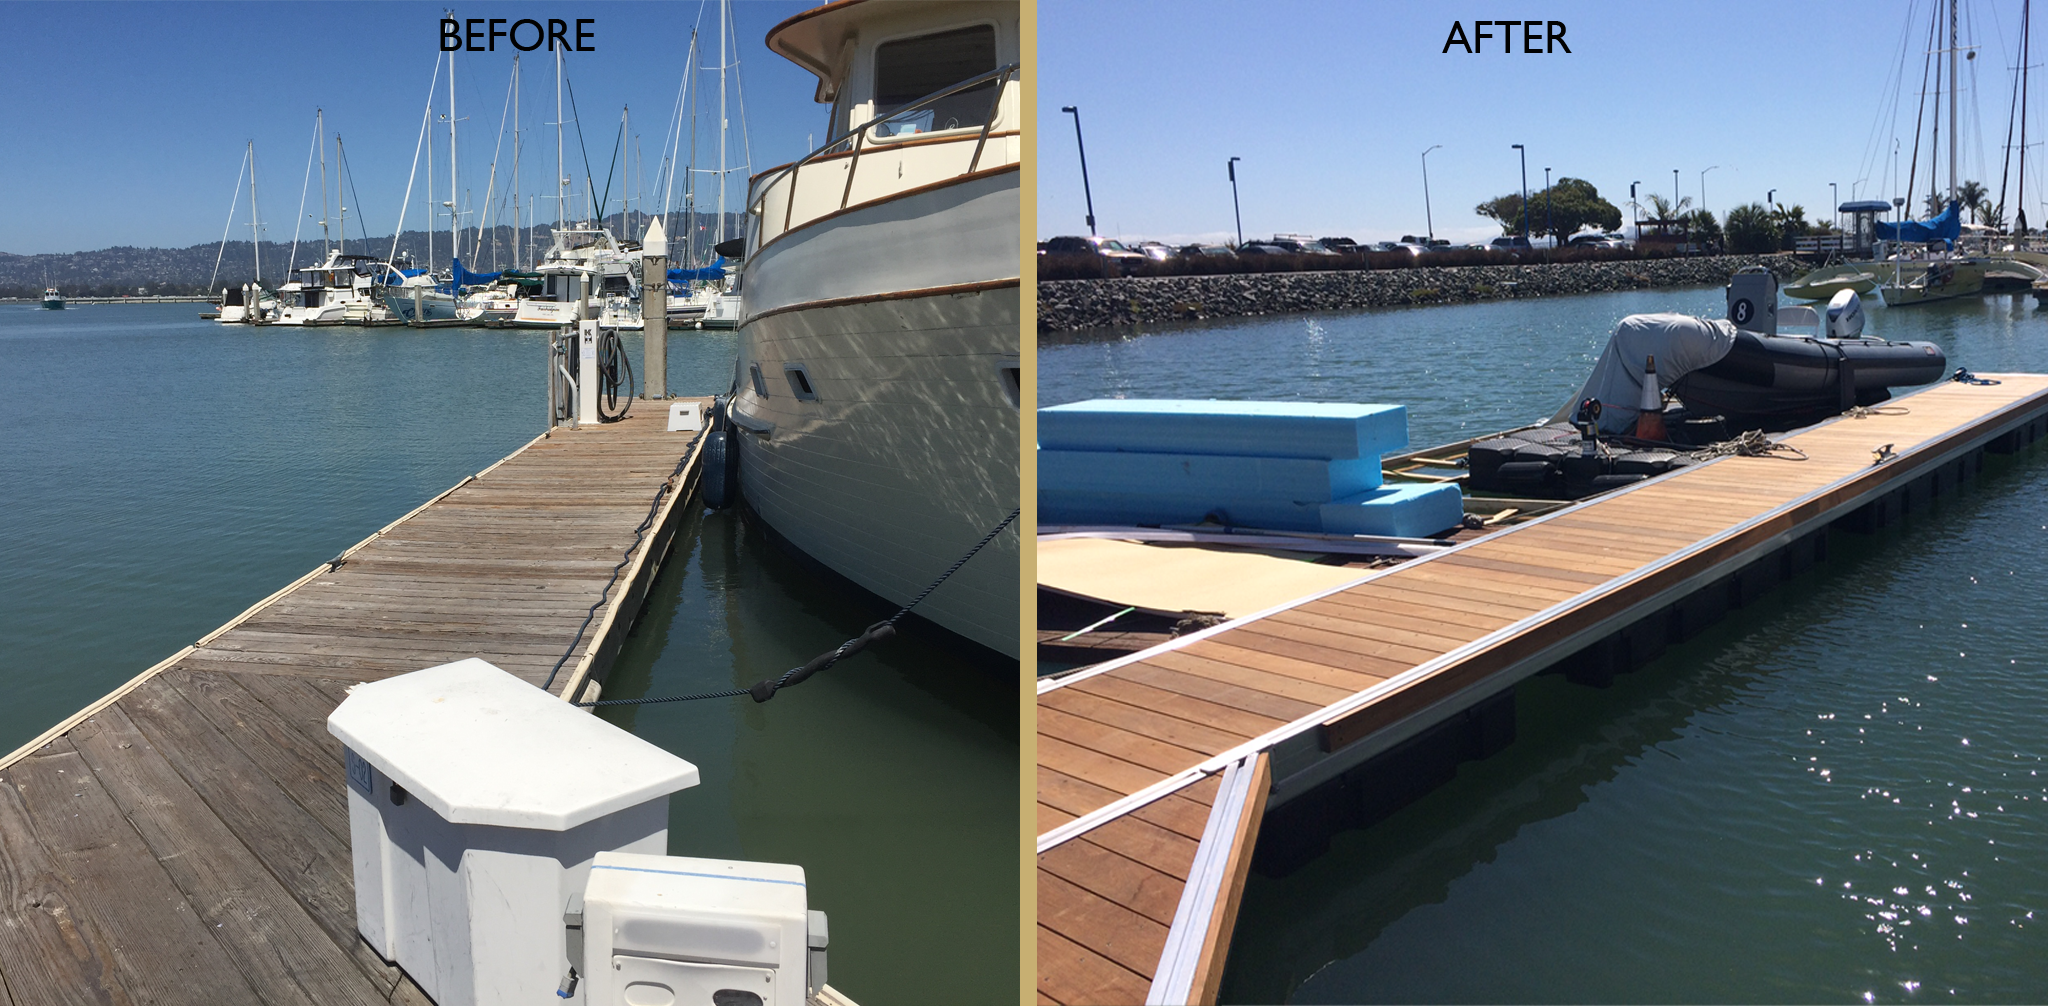 EMERYCOVE YACHT HARBOR renovation is started!